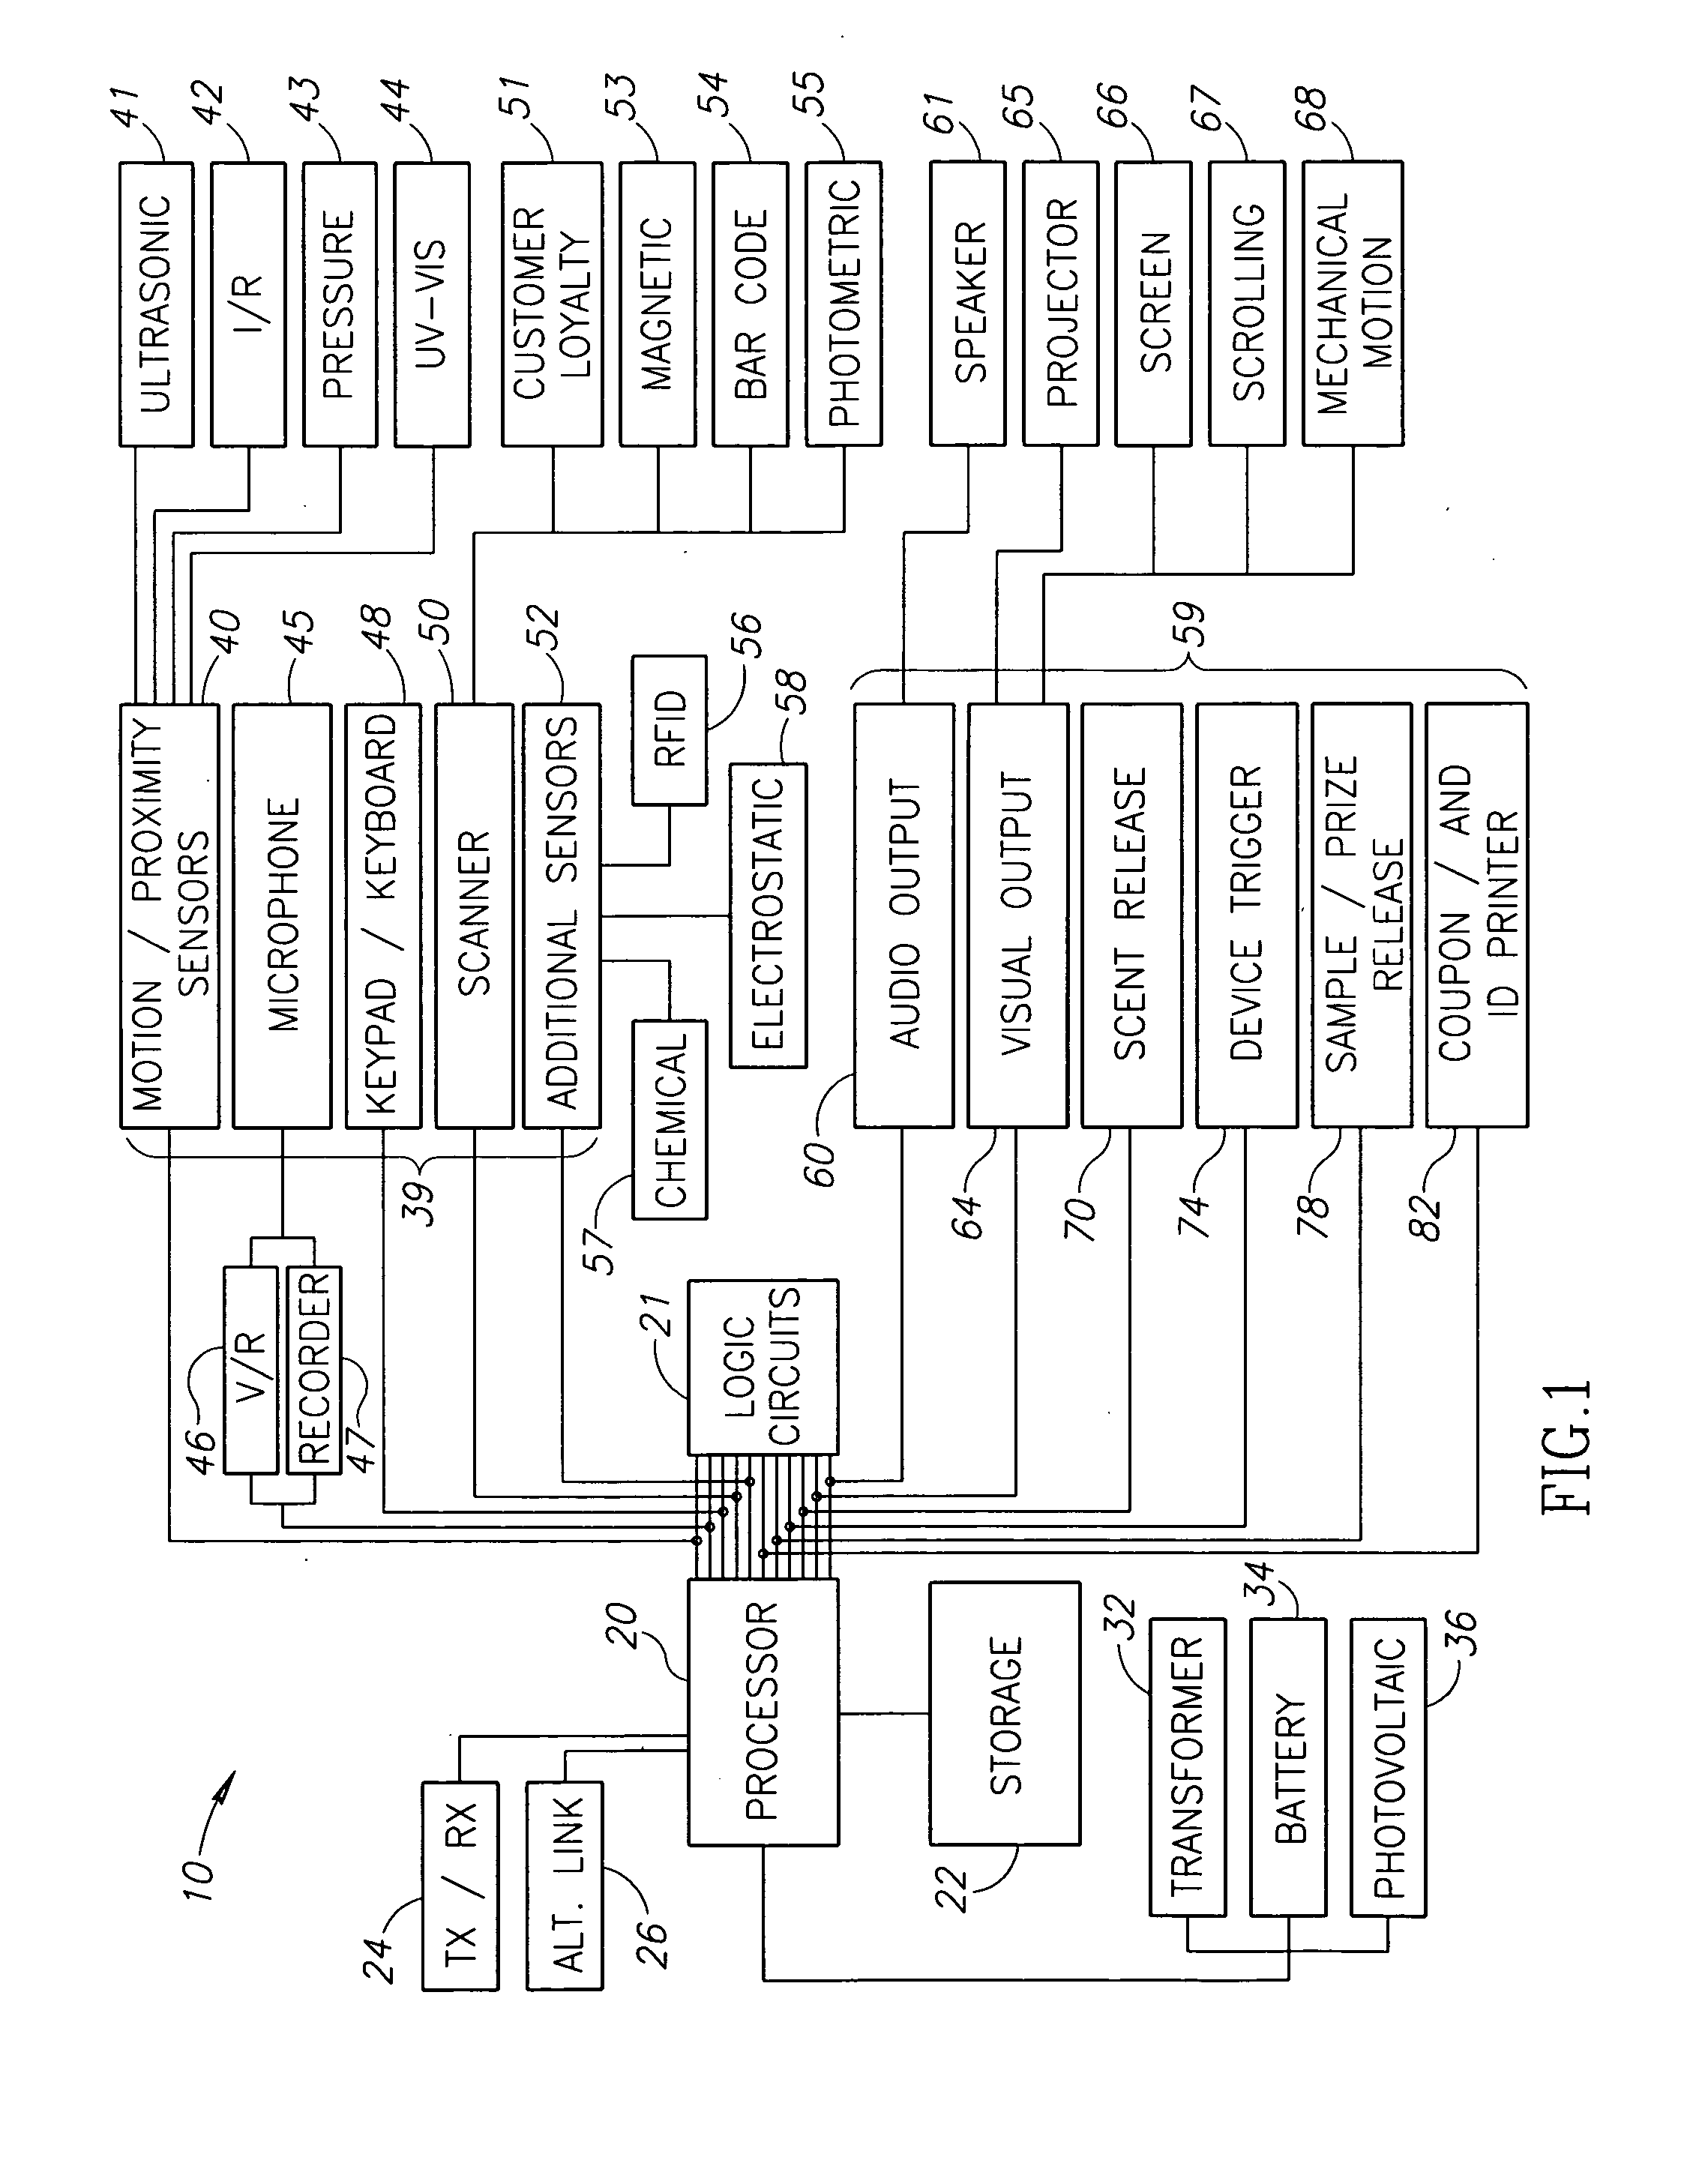 Multi-unit system and methods for game augmented interactive marketing